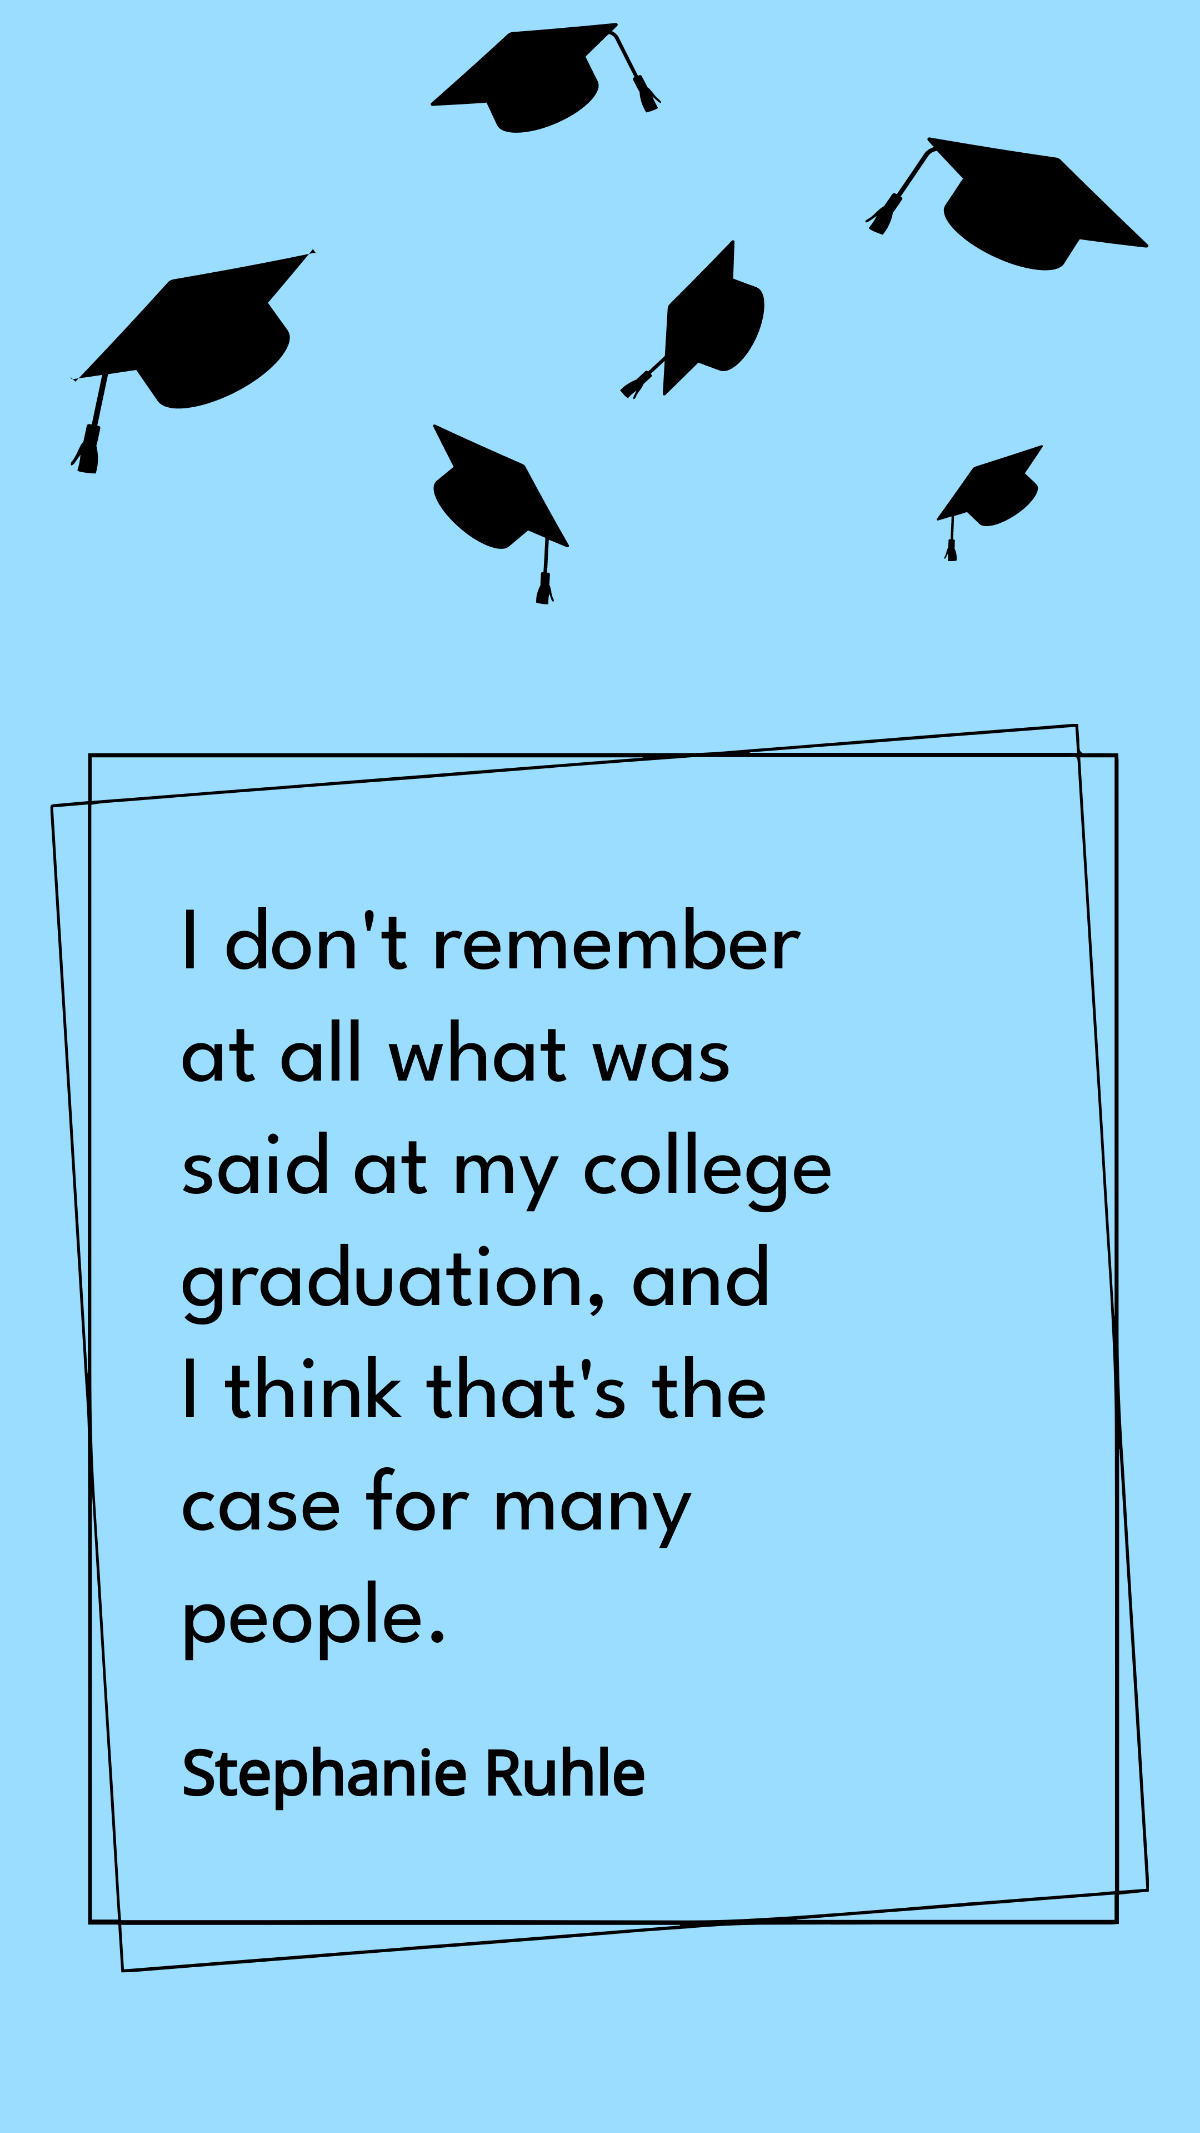 Stephanie Ruhle - I don't remember at all what was said at my college graduation, and I think that's the case for many people.